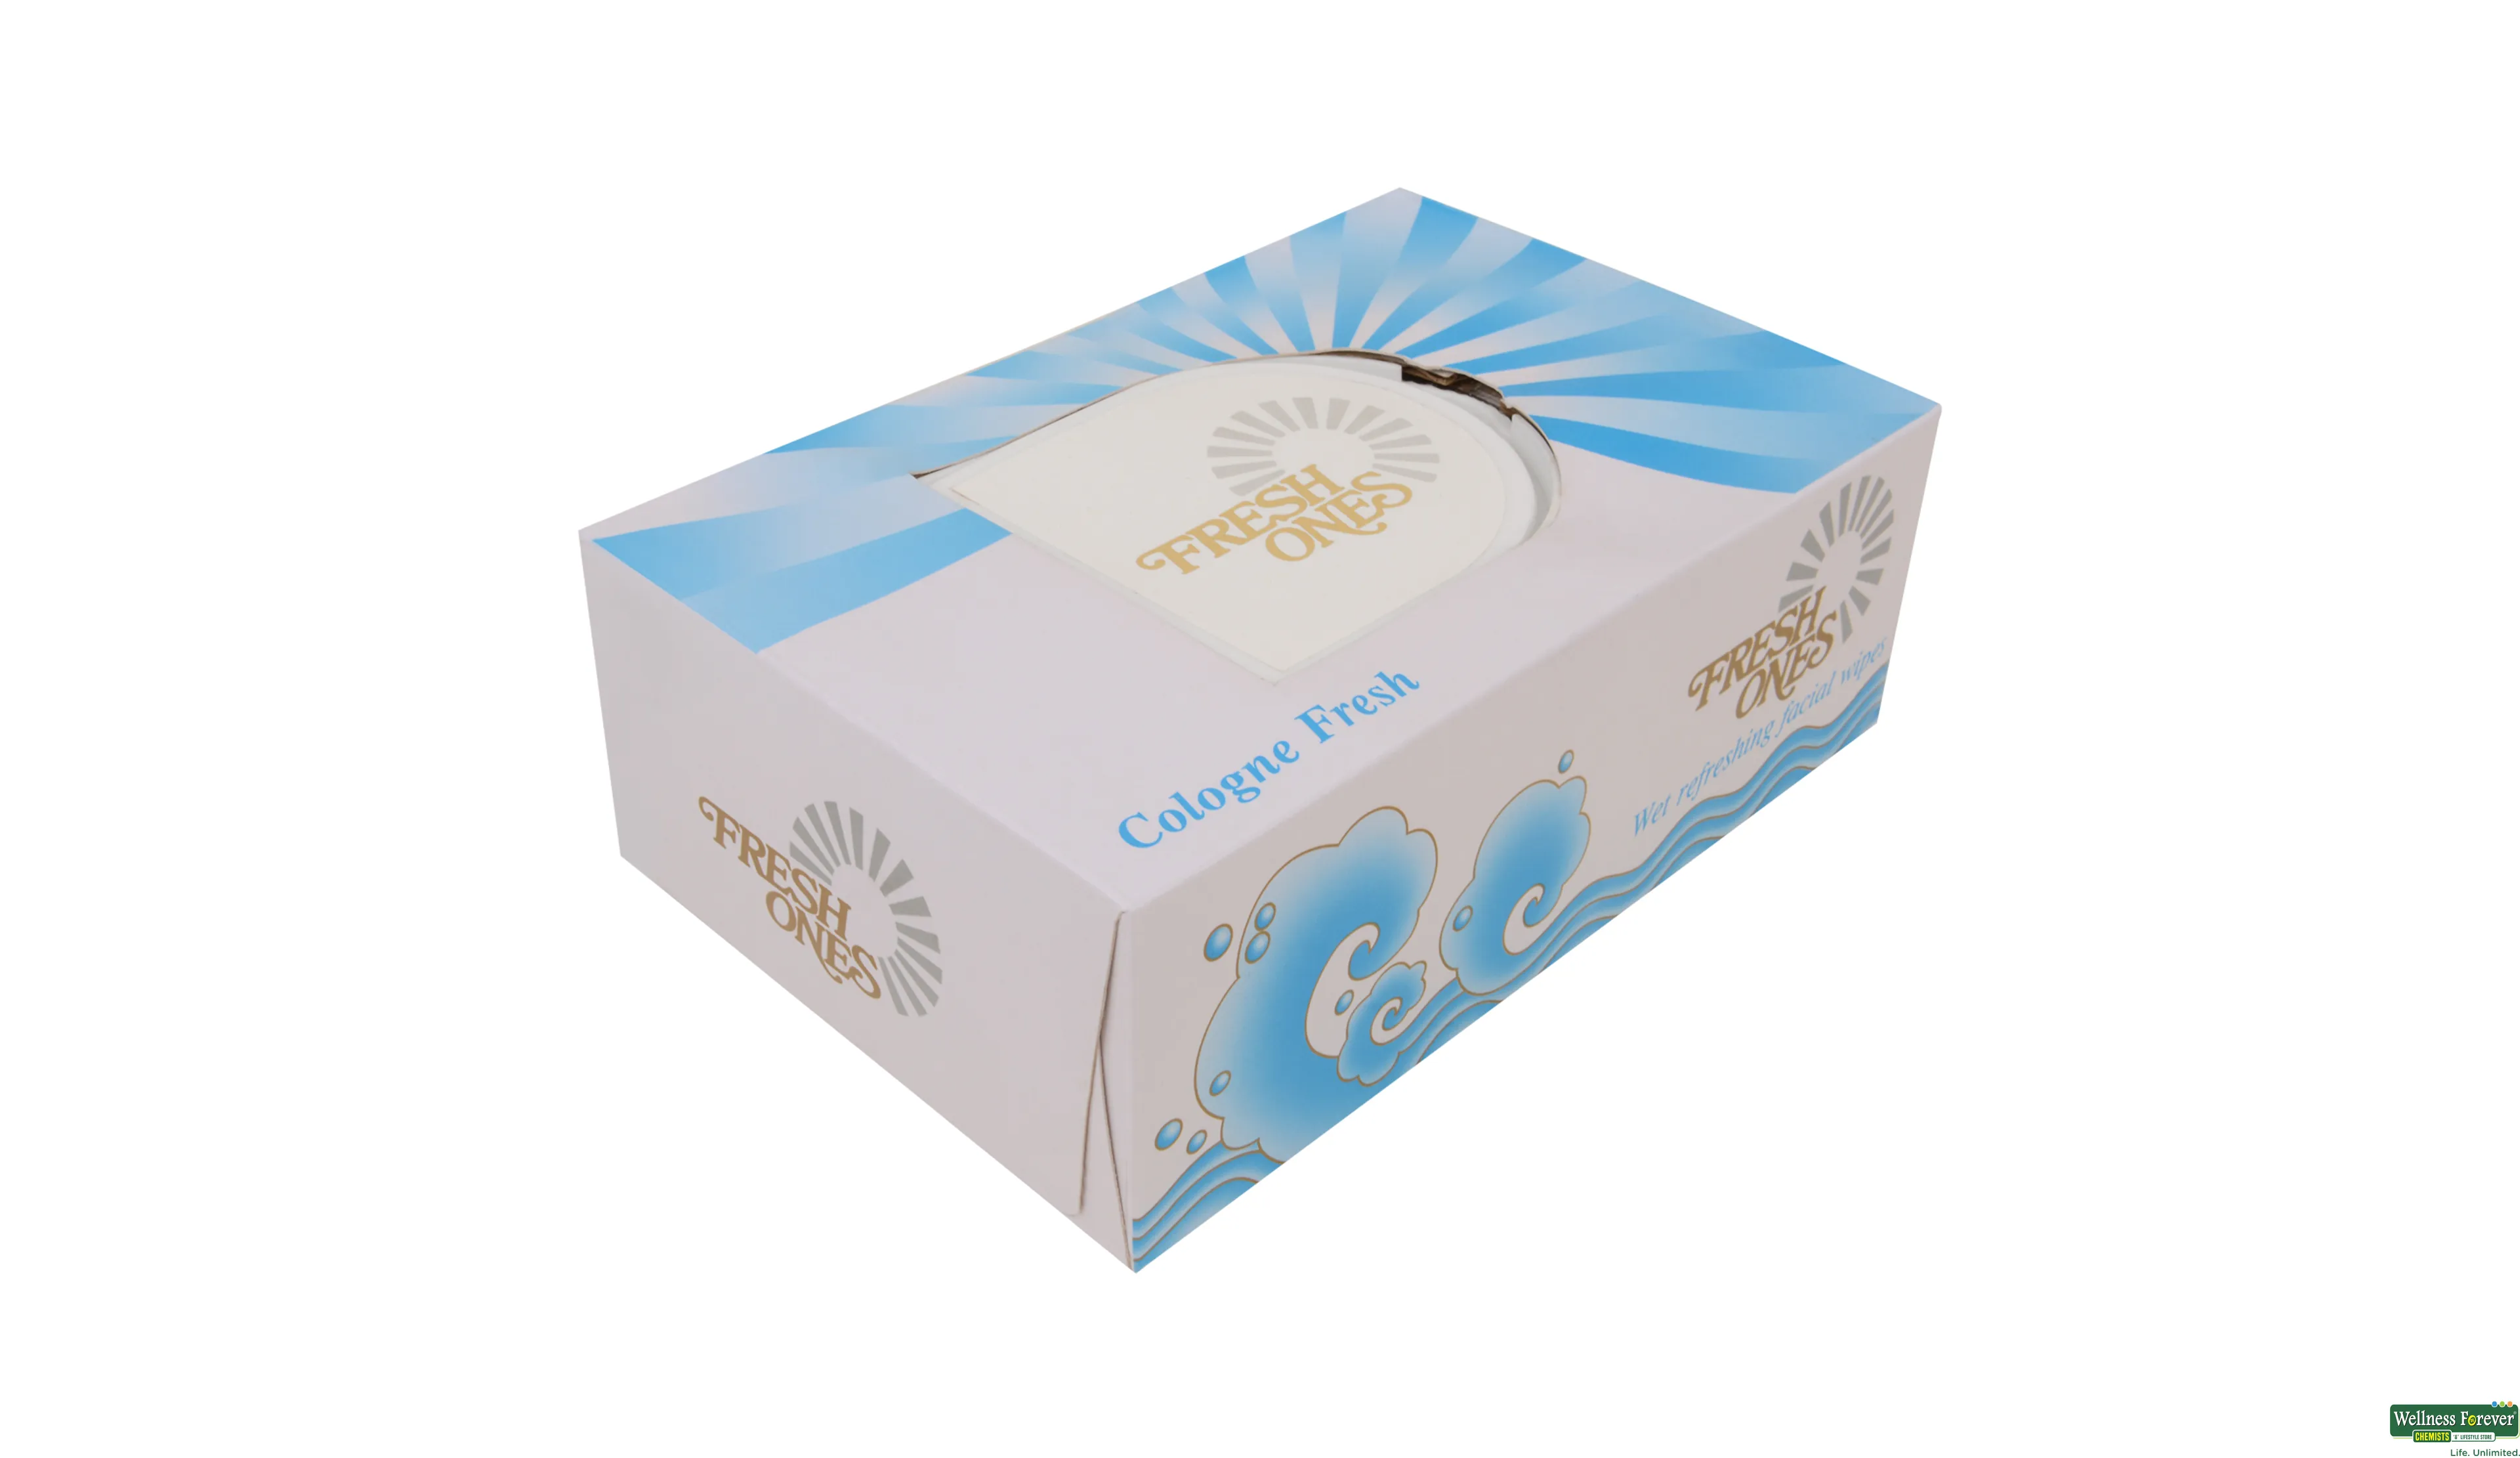 FRESH ONES WIPES REF COLOGNE BOX 70PC- 2, 75PC, 